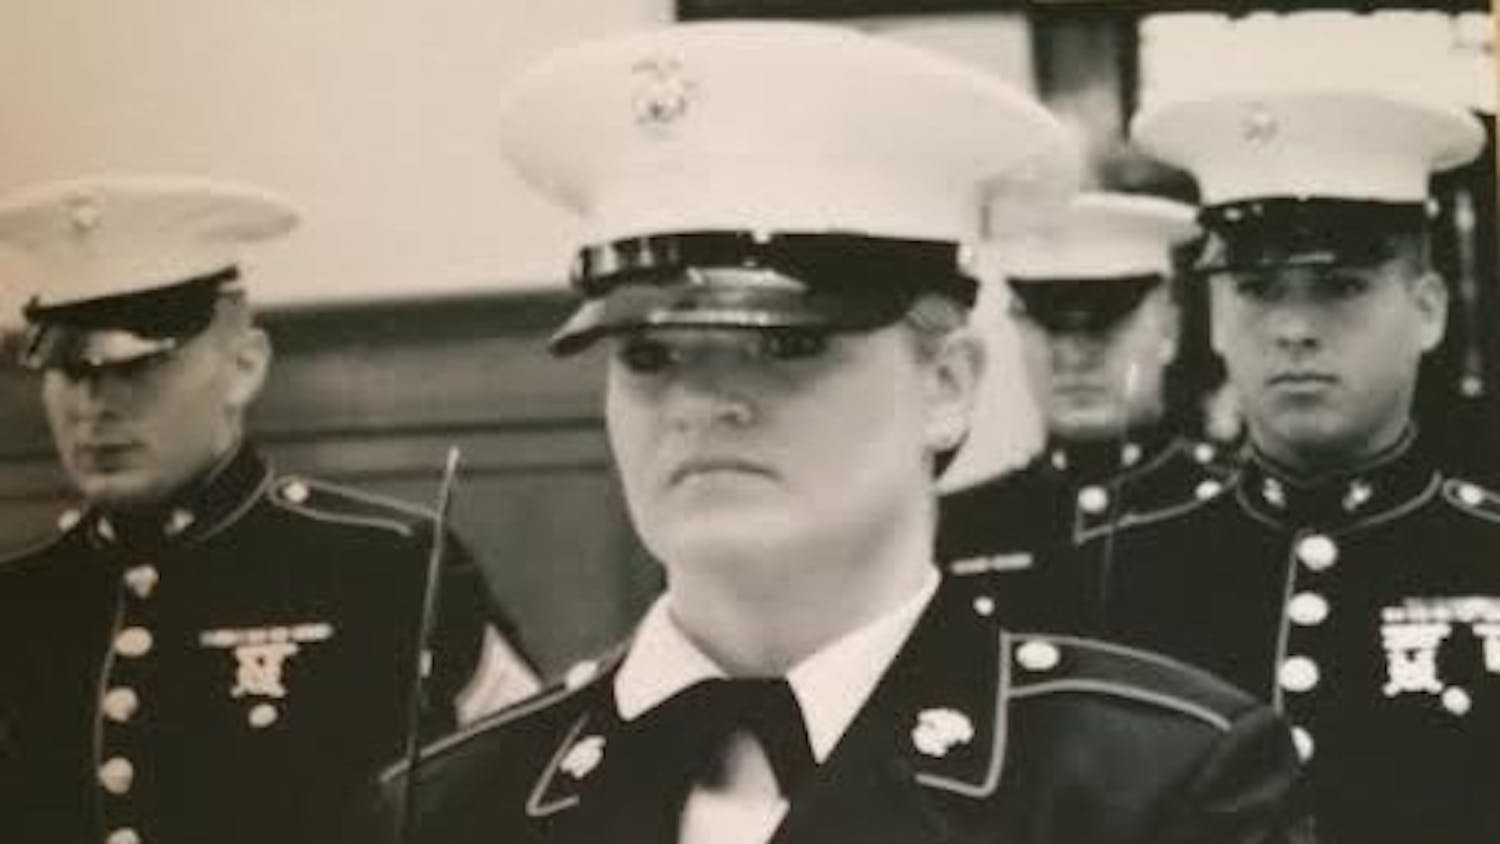 Courtesy of Lacy Jo Evans. Evans, a soon to be graduate, served in the Marine Corps for four years prior to her enrollment in the University of North Carolina at Chapel Hill.&nbsp;